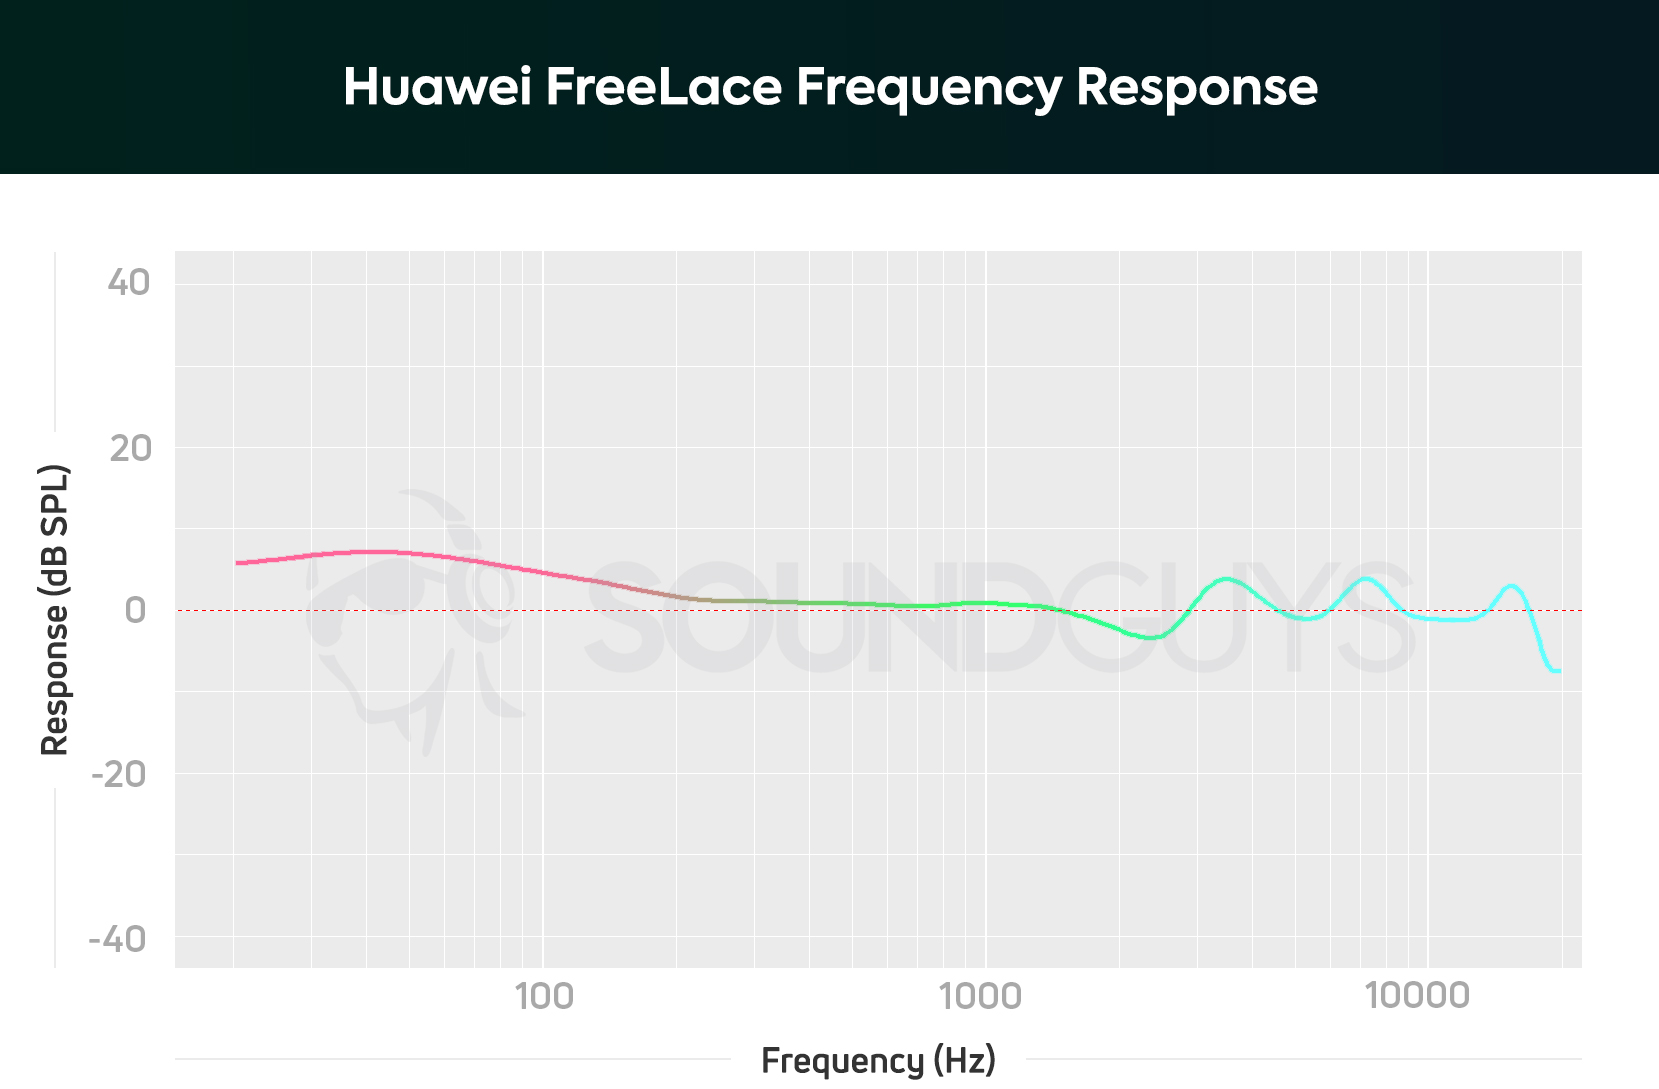 Huawei FreeLace neckband earbuds frequency response chart.